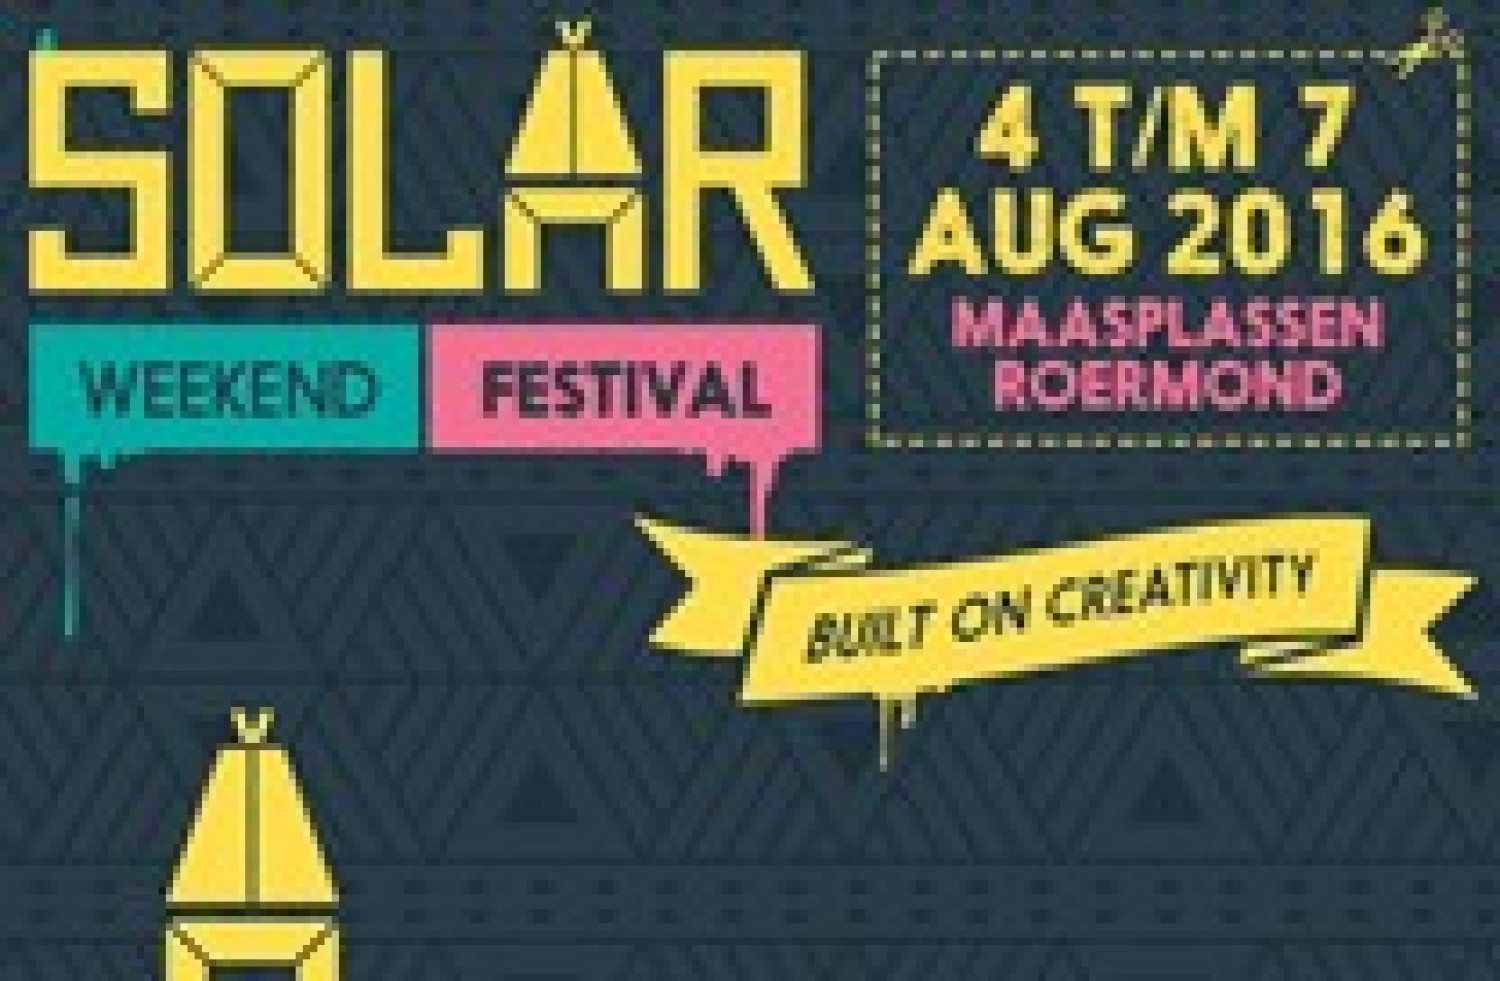 Party report: Solar weekend 2016, Roermond (06-08-2016)